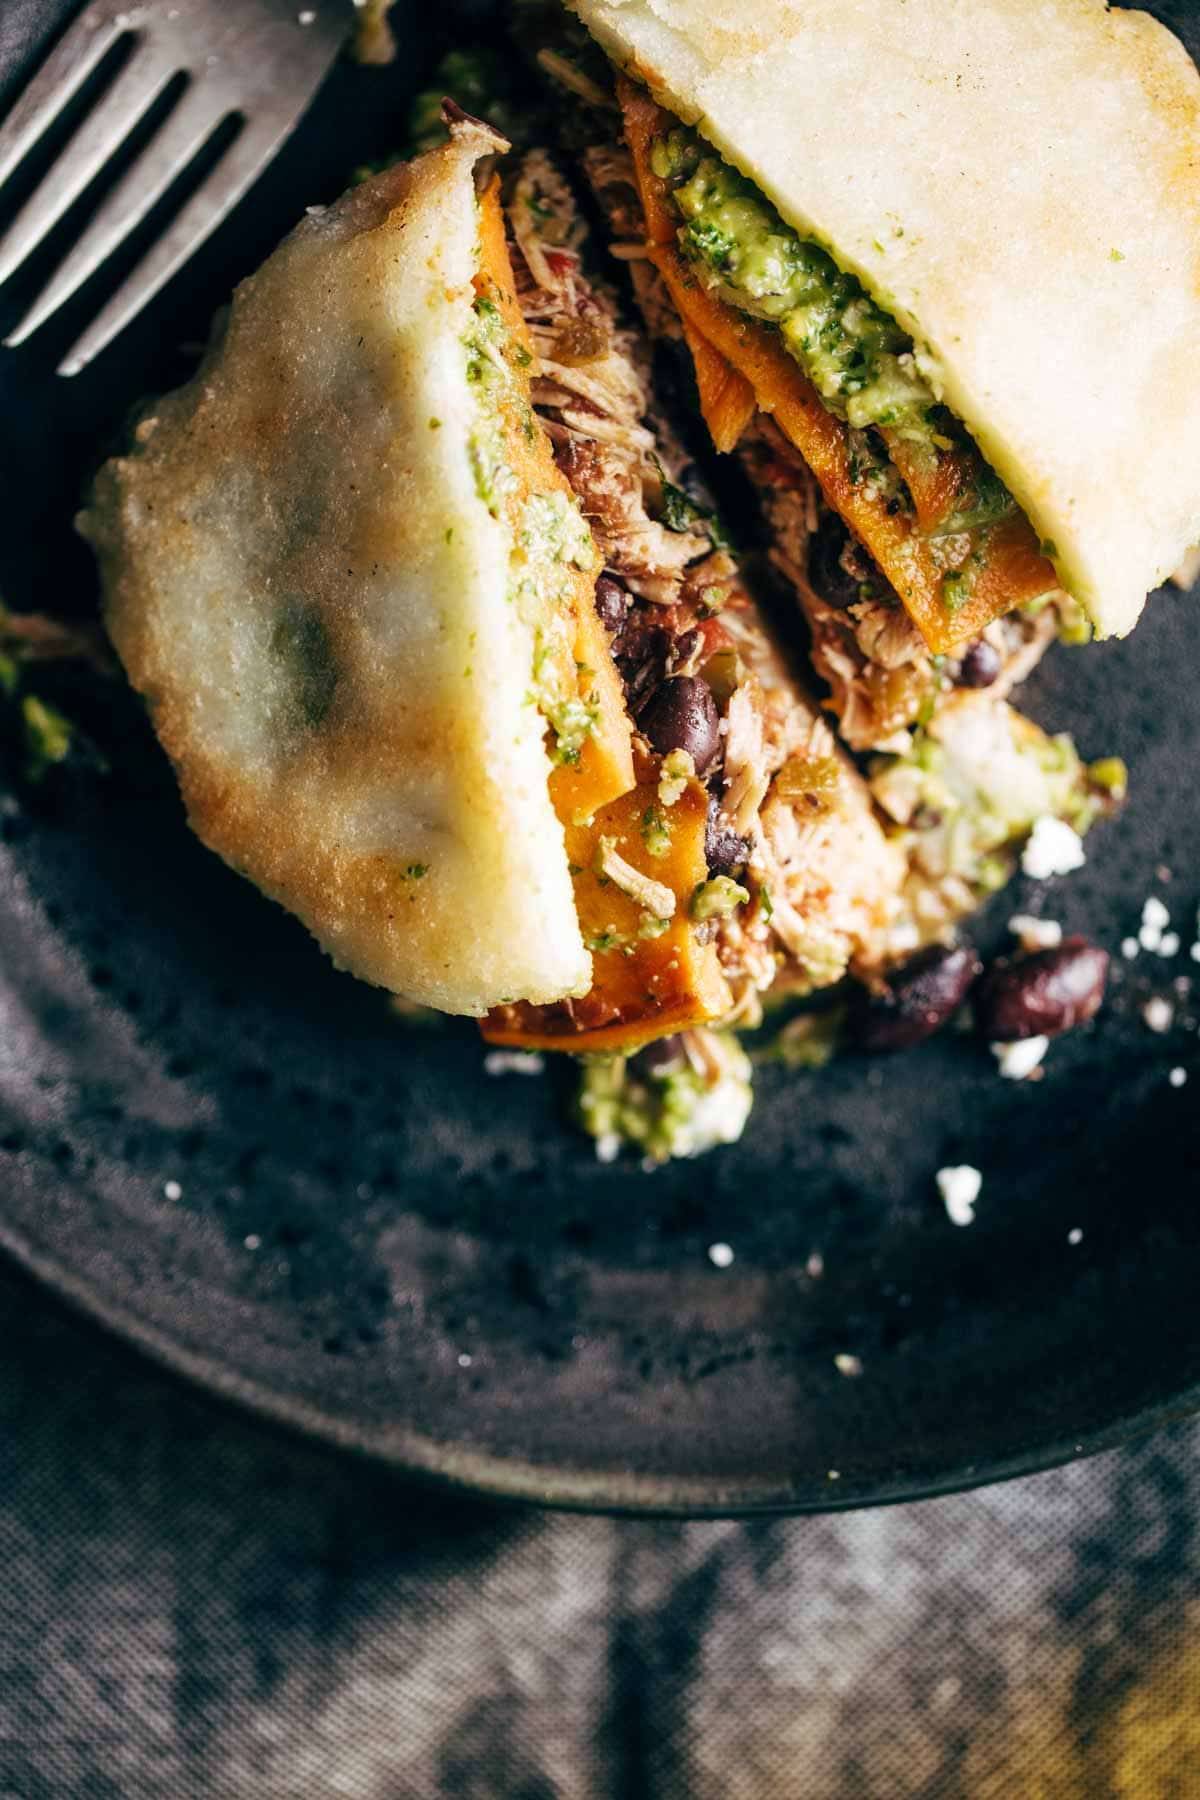 Arepas - fried cornmeal pockets stuffed with all the fillings you could ever want, like carnitas, spicy chicken, sweet potatoes, black beans, sauces, and more. THESE ARE SO GOOD! | pinchofyum.com